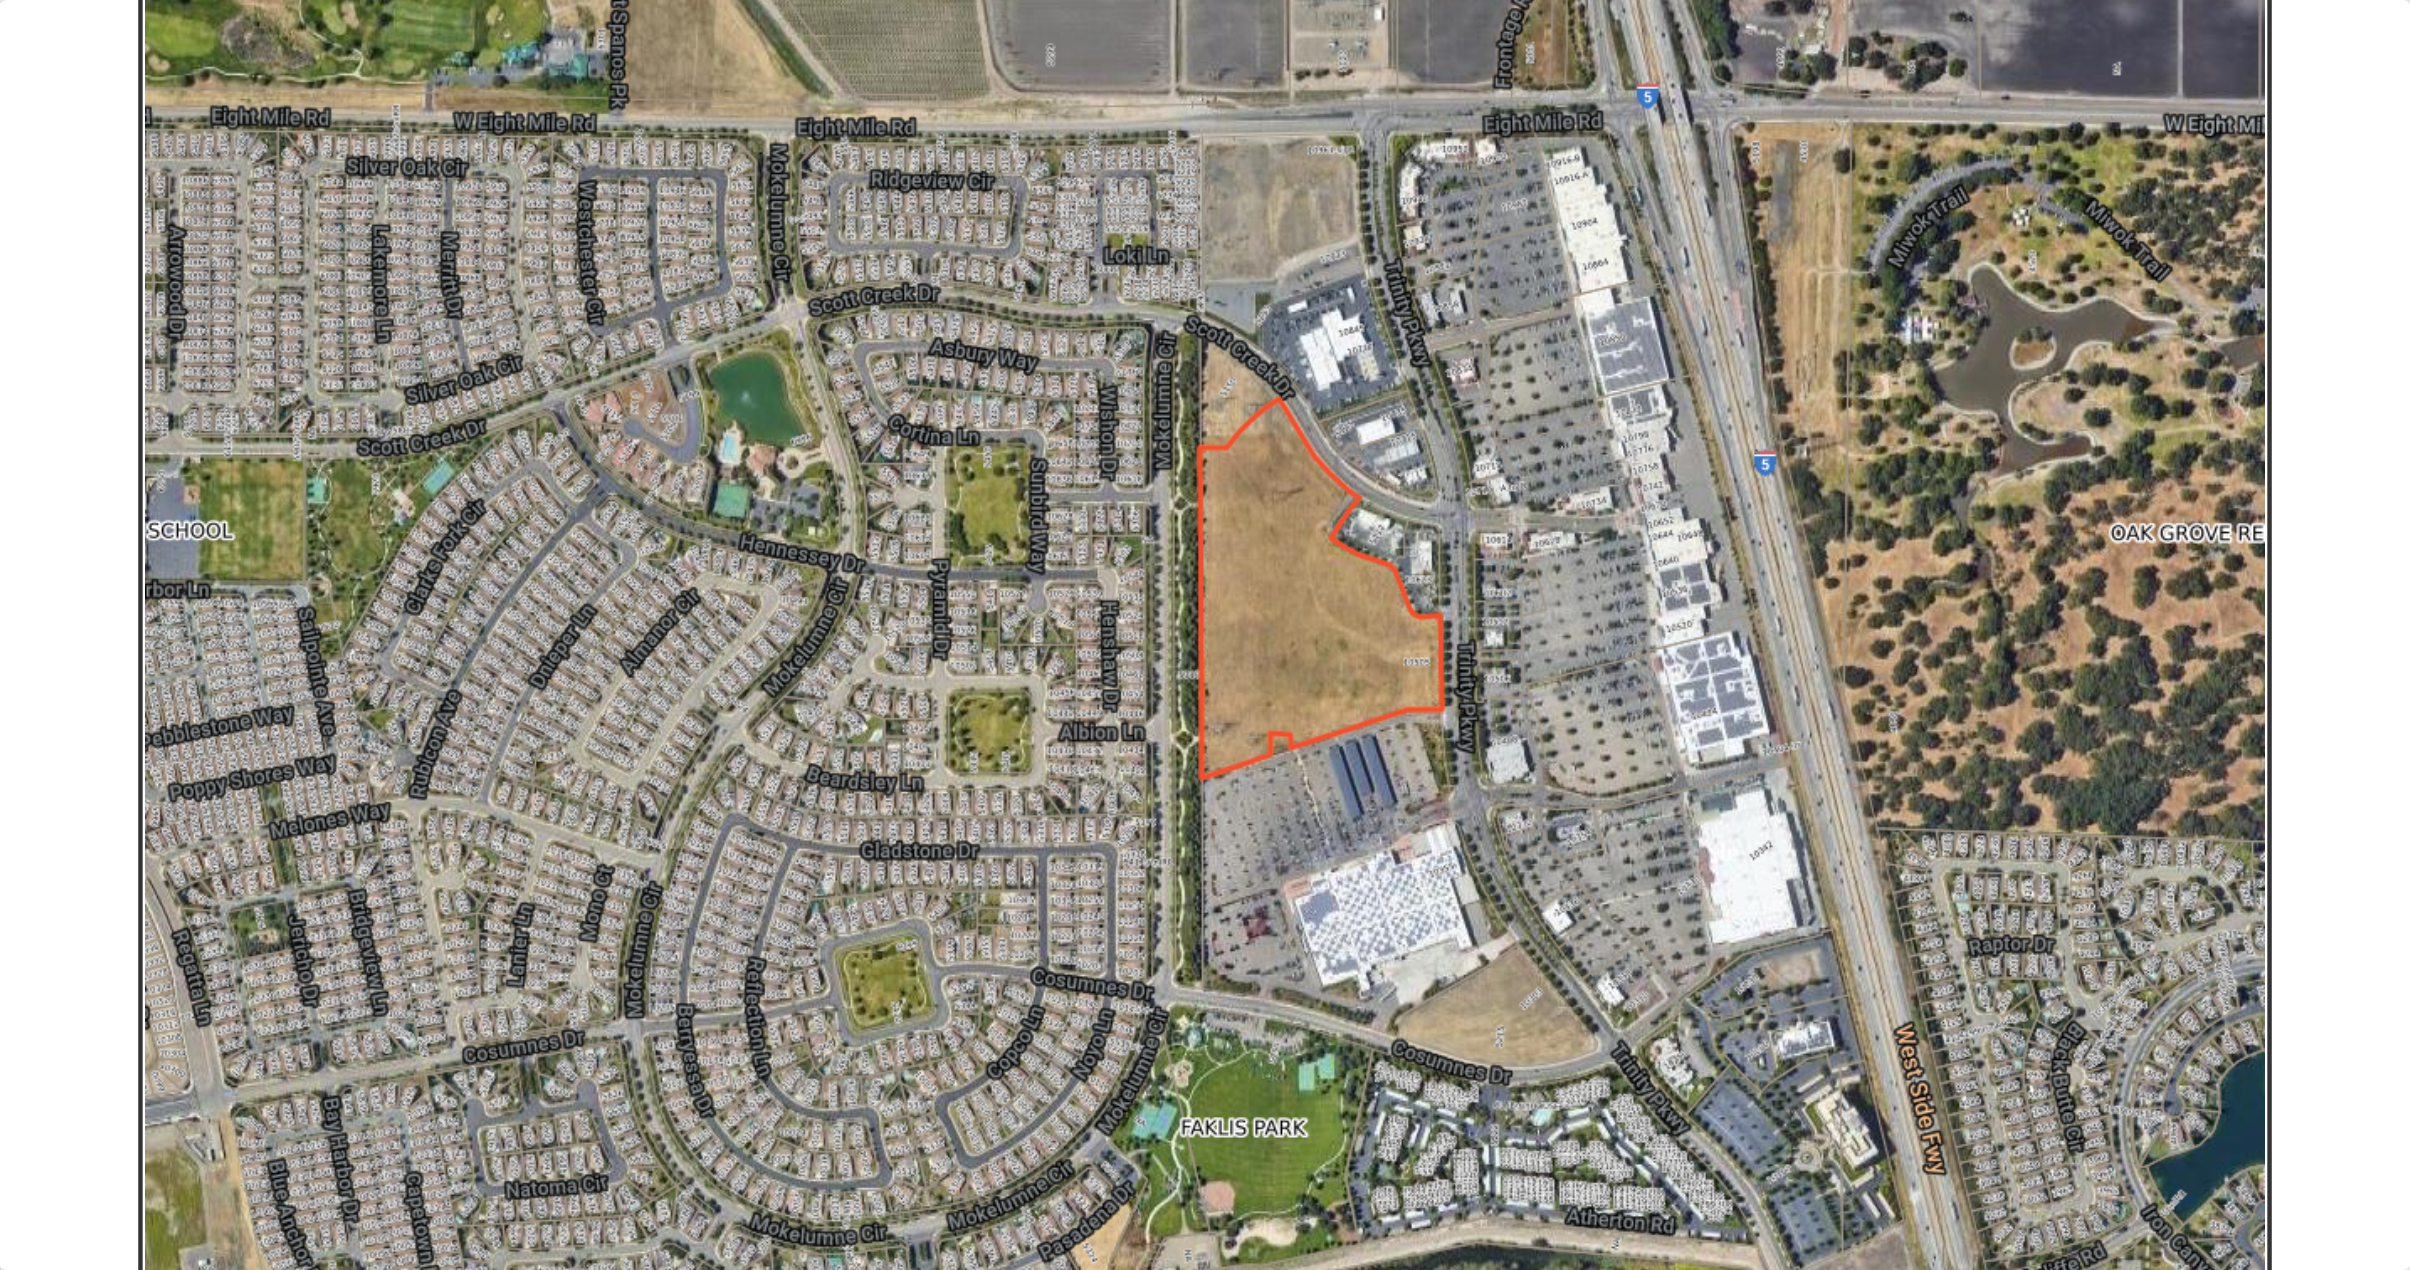 Aerial view of a proposed development site in North Stockton, outlined in red, located near the intersection of Trinity Parkway and Scott Creek Drive. The site is adjacent to residential neighborhoods and commercial properties, with plans to construct new Chick-fil-A, In-N-Out, and Dutch Bros locations, as well as a storage facility.